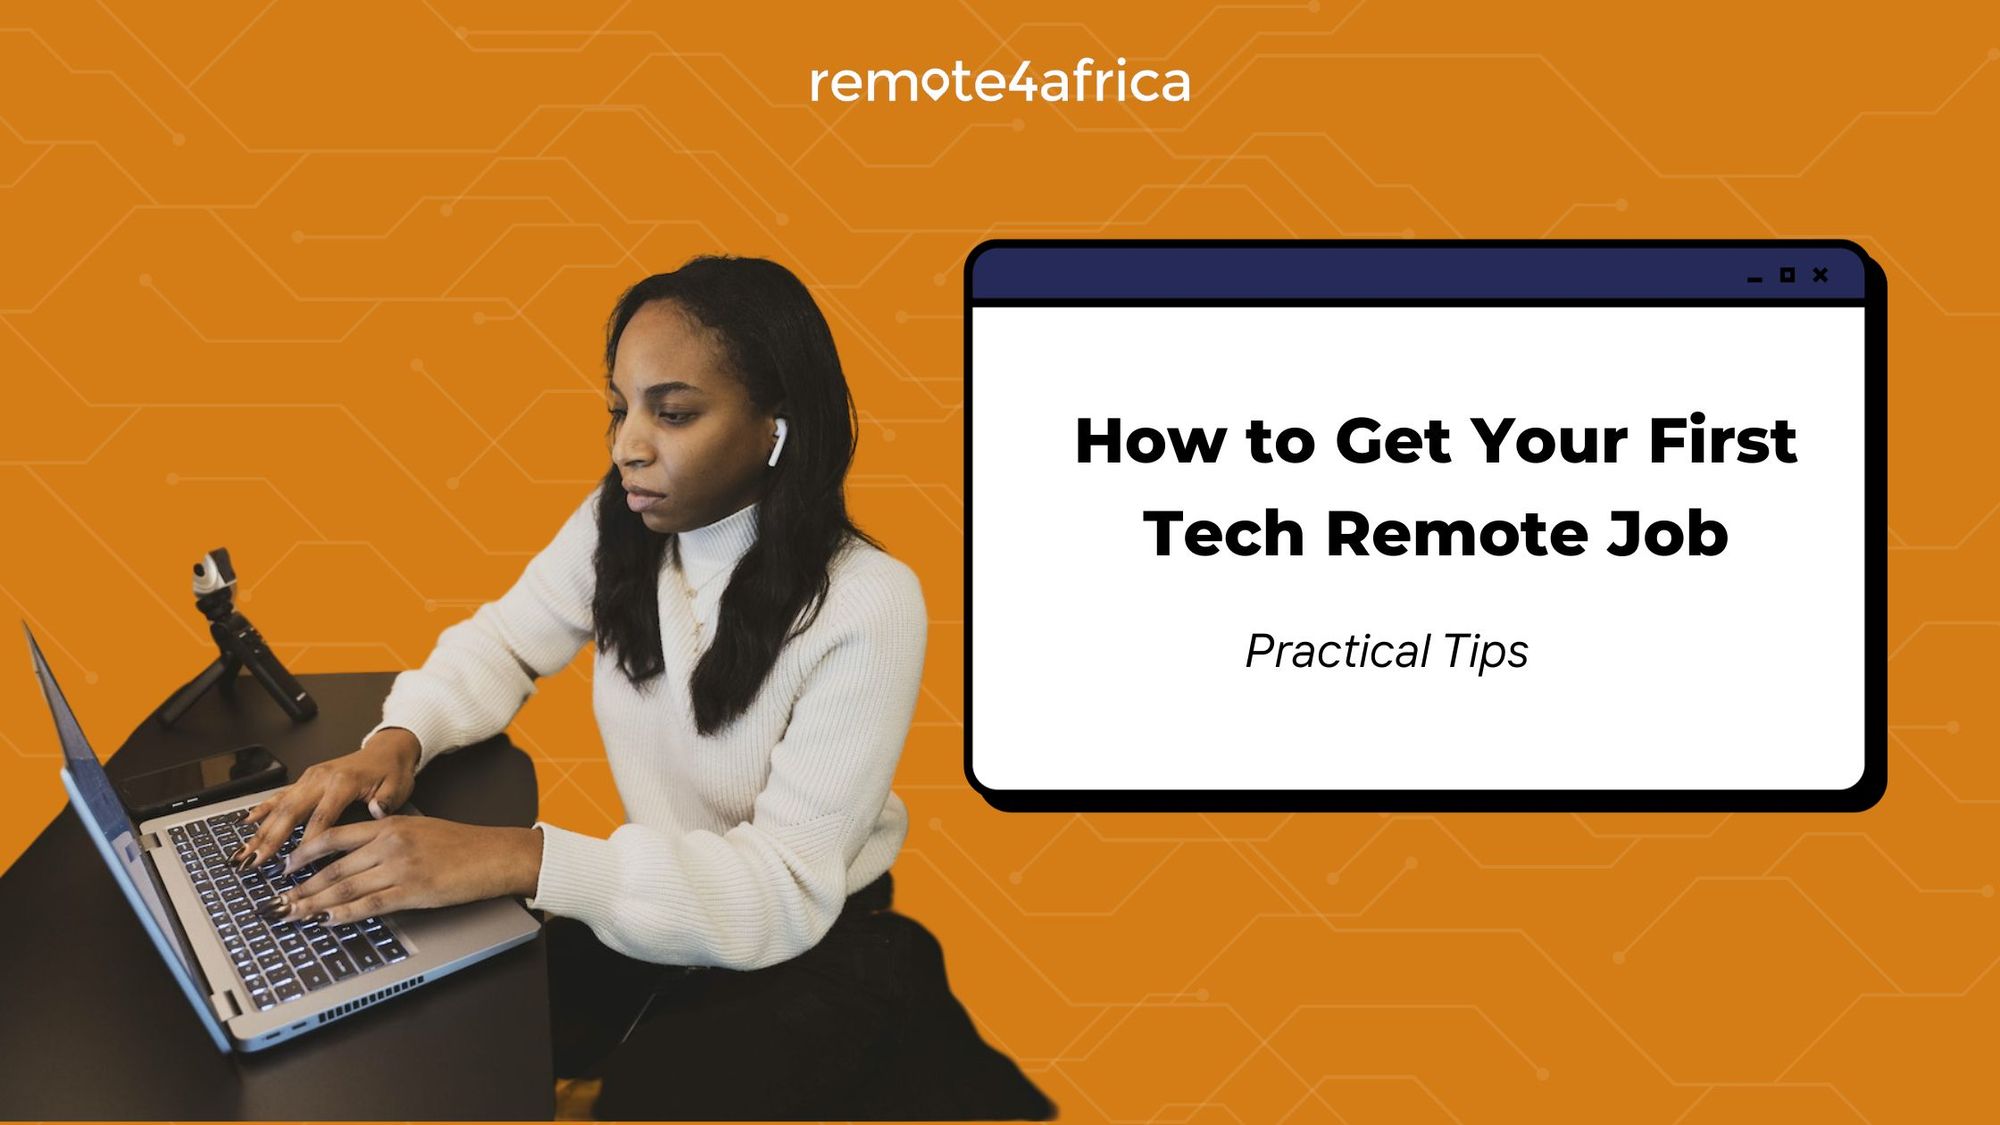 How to Get Your First Tech Remote Job